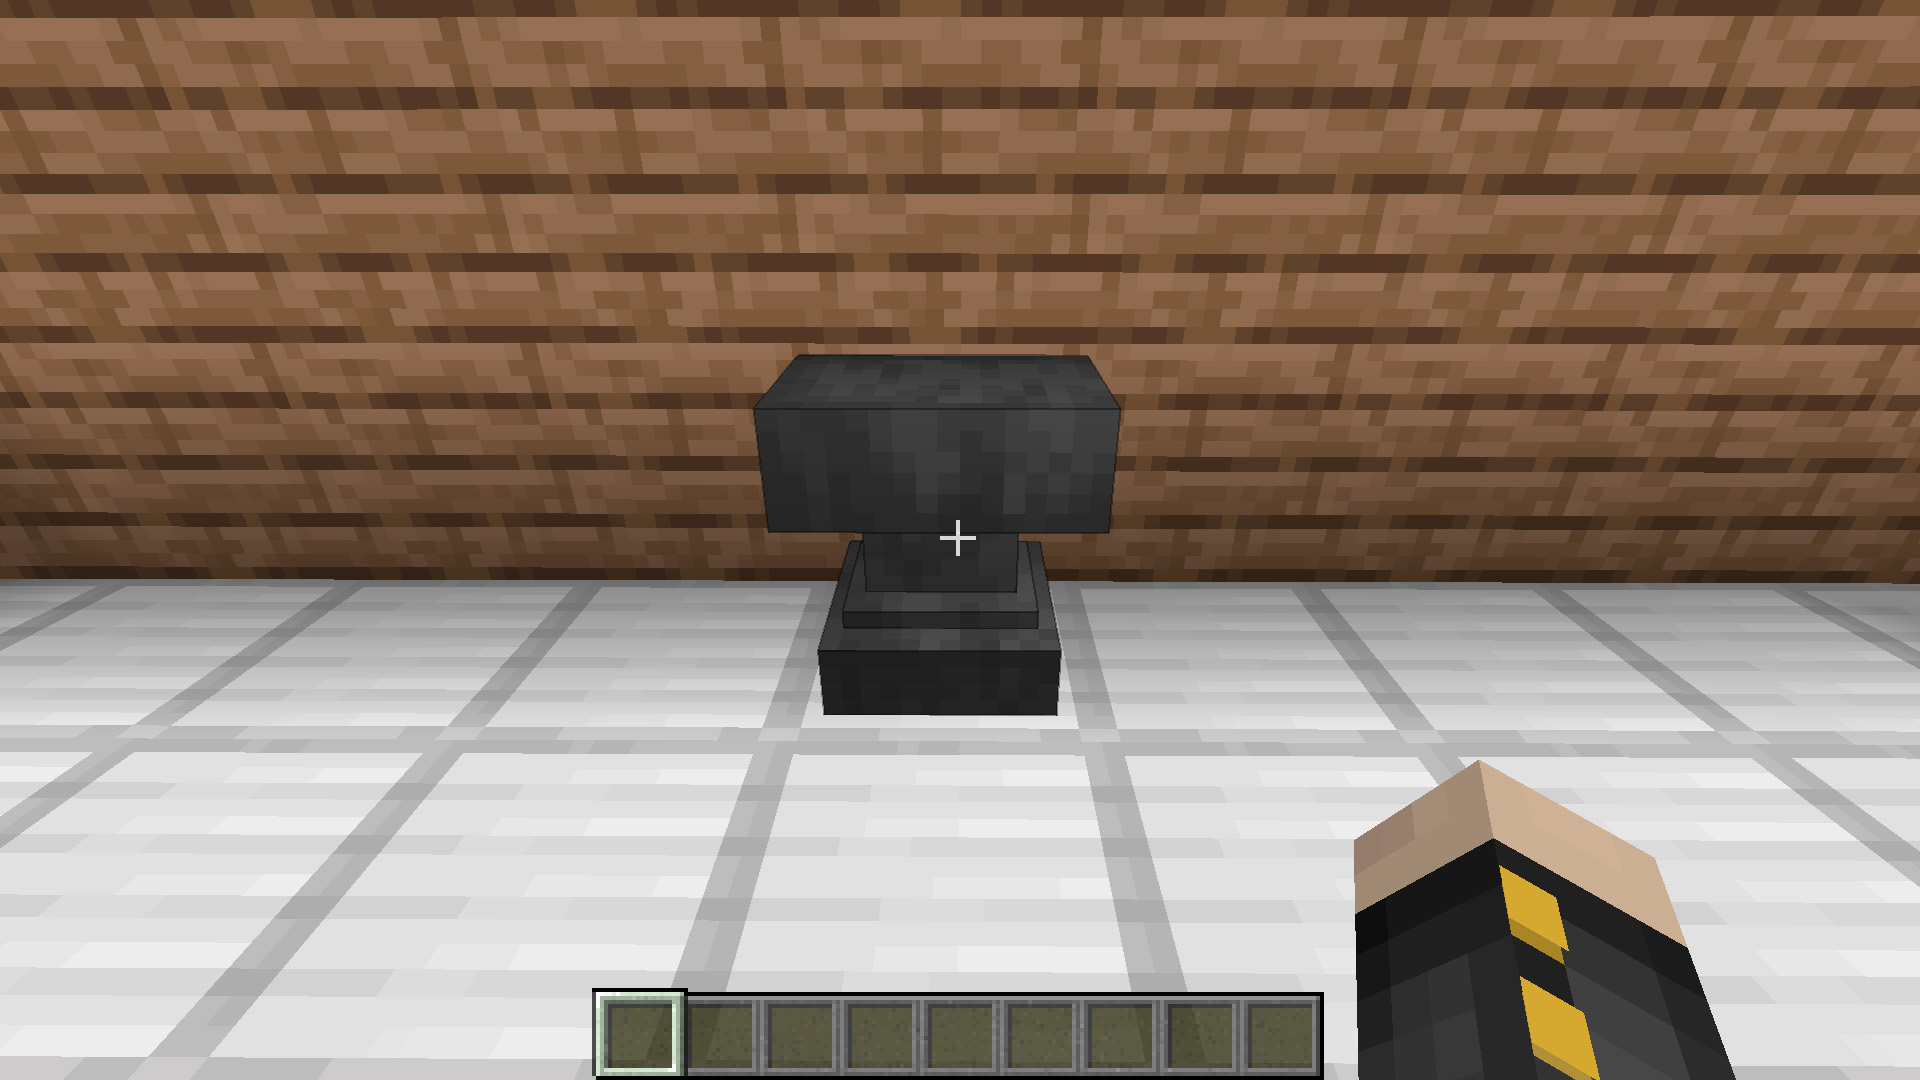 minecraft how to make a anvil